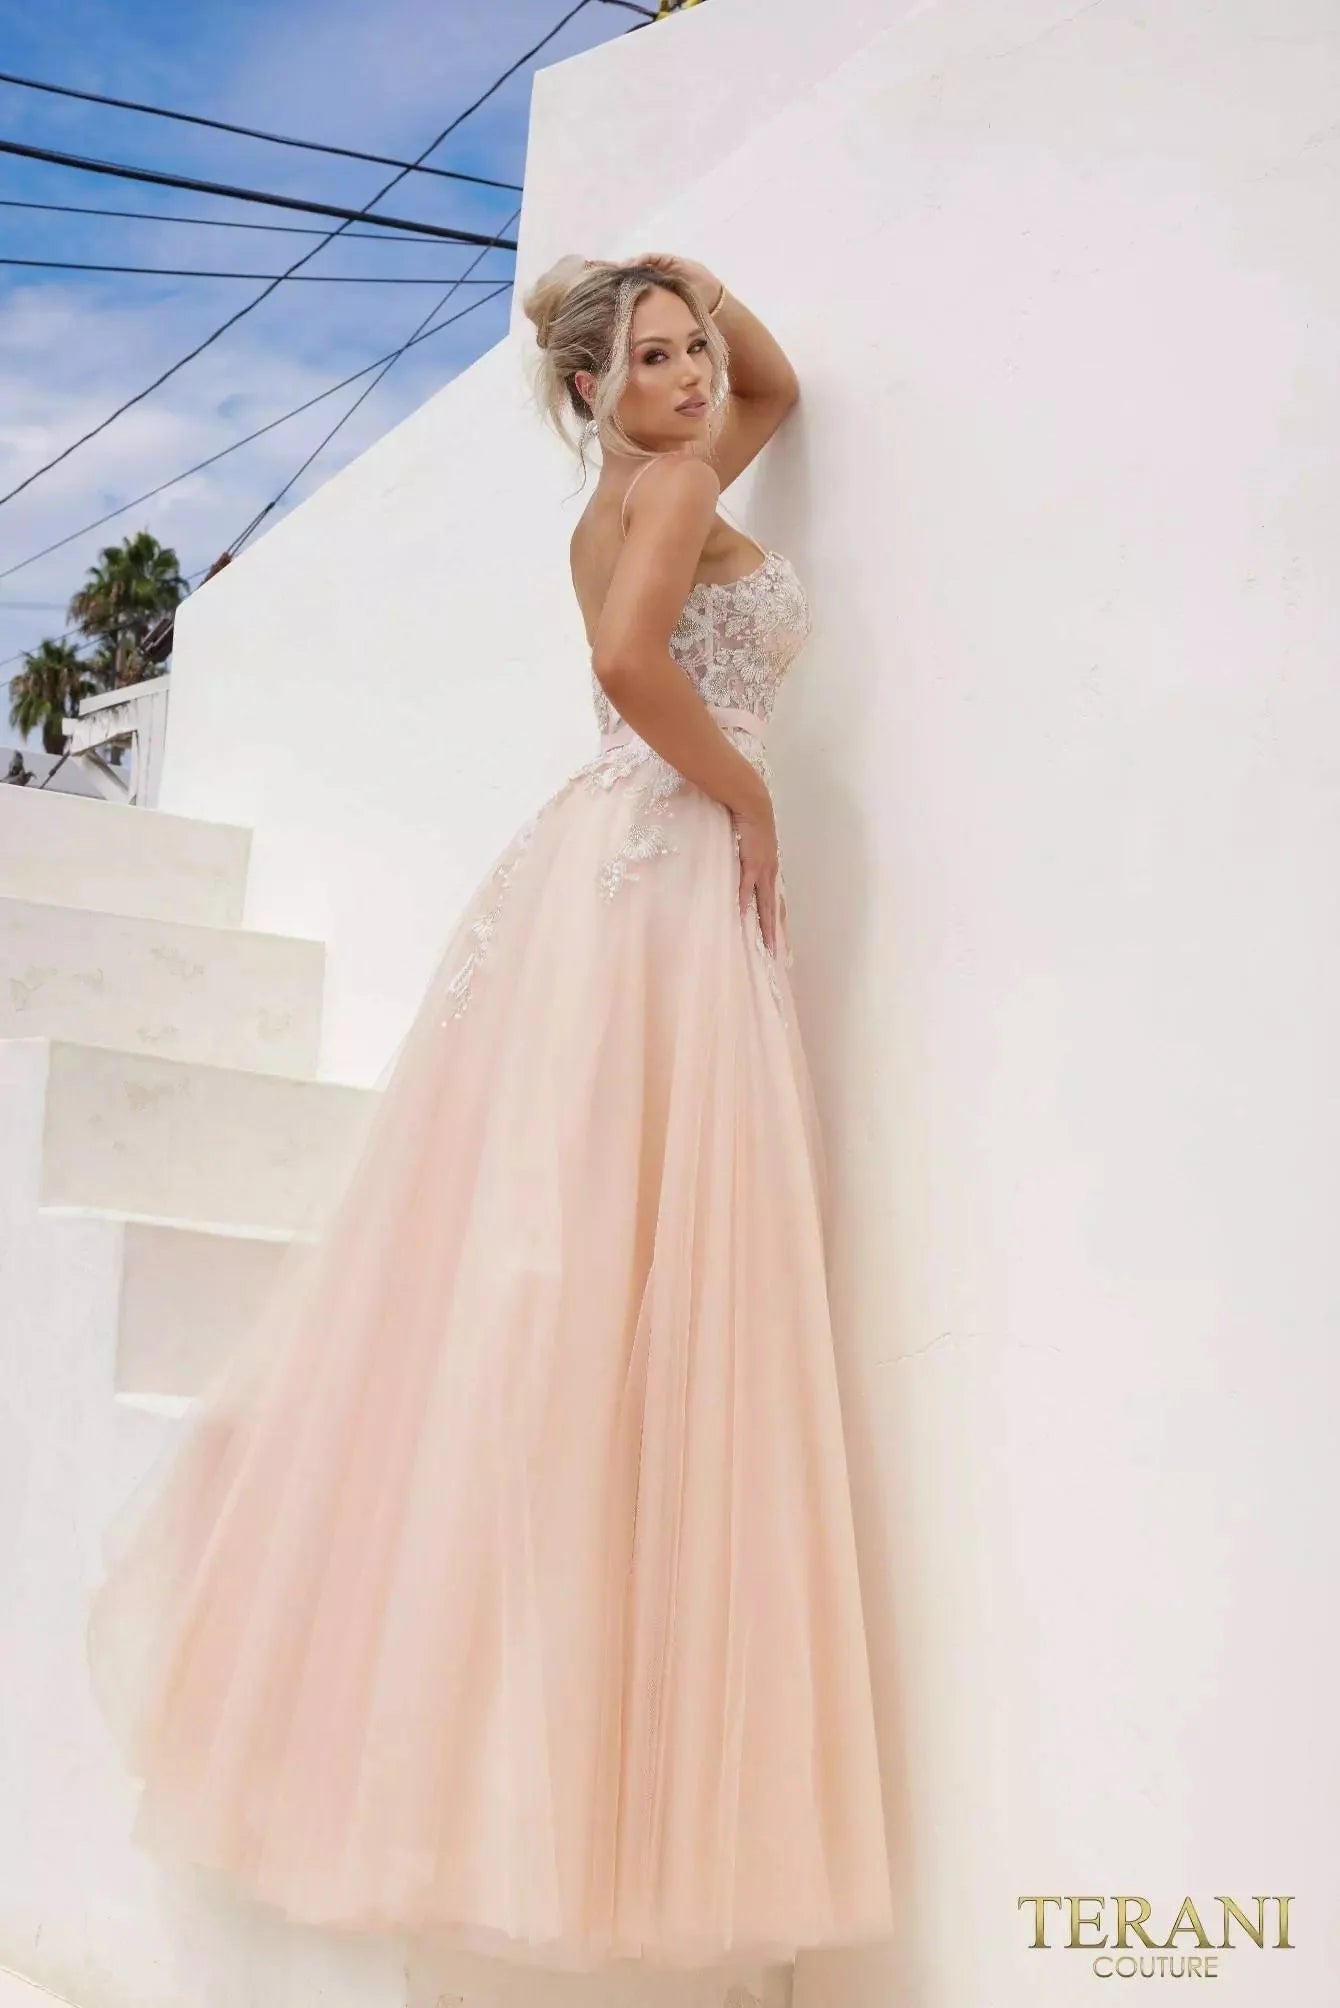 Terani Couture 241P2025 - Sleeveless Embroidered Ballgown Special Occasion Dress